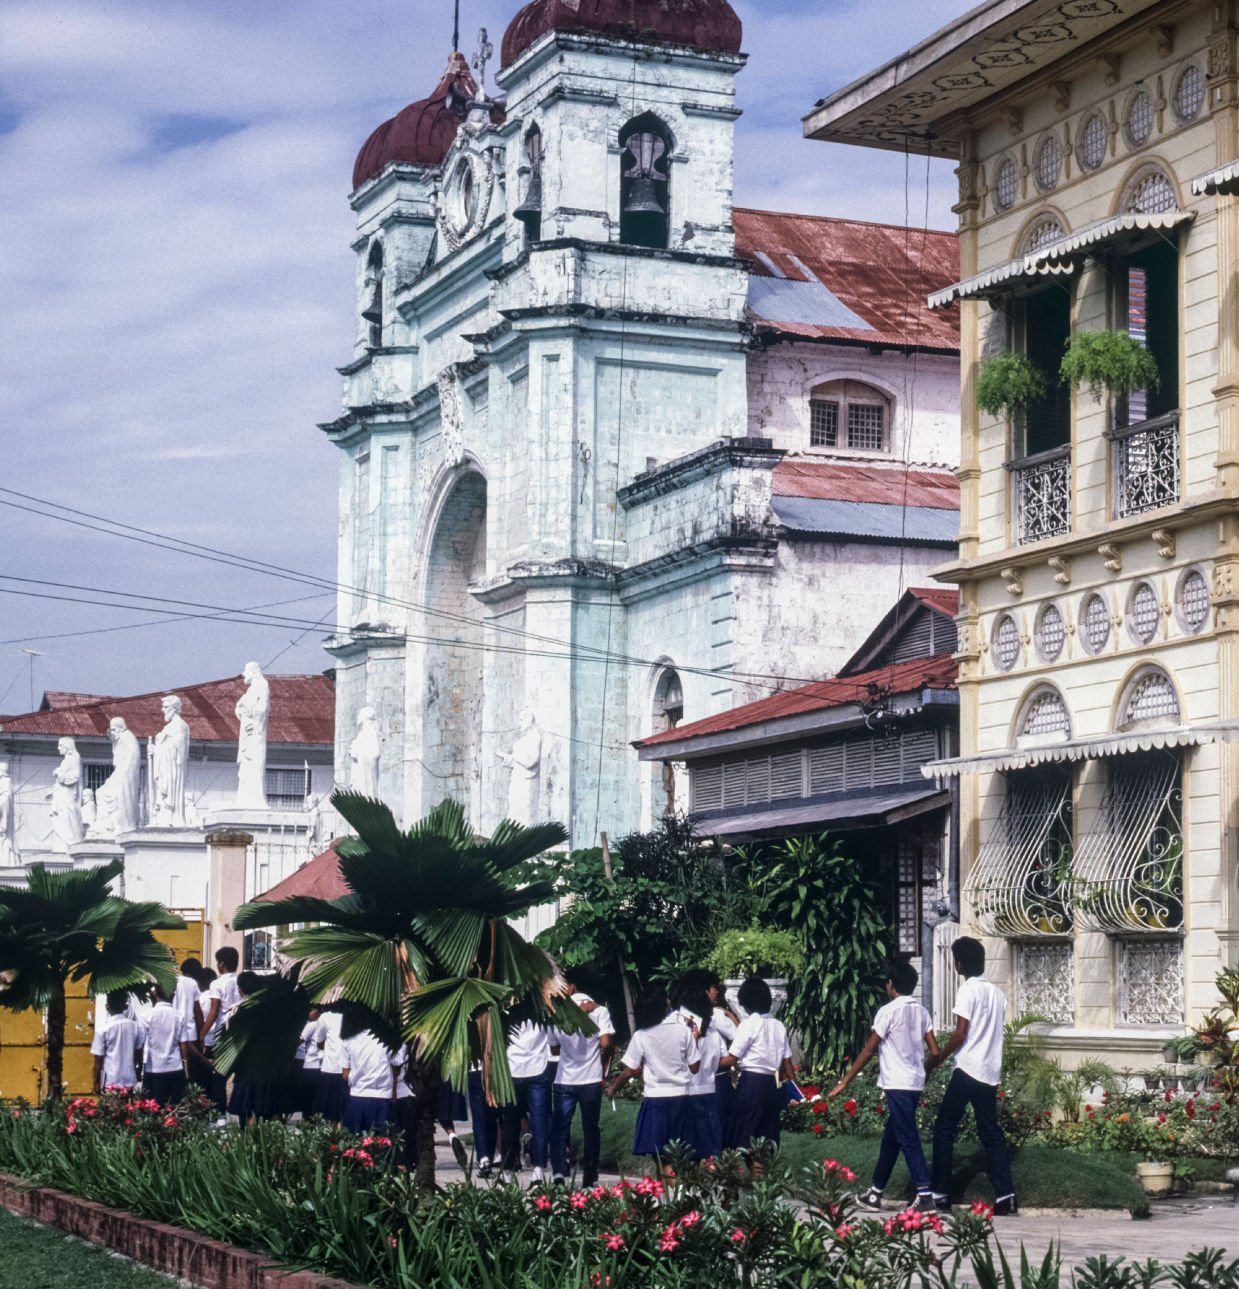 The church and a primary school in Carcar, Cebu Island, Philippines, July 1985.